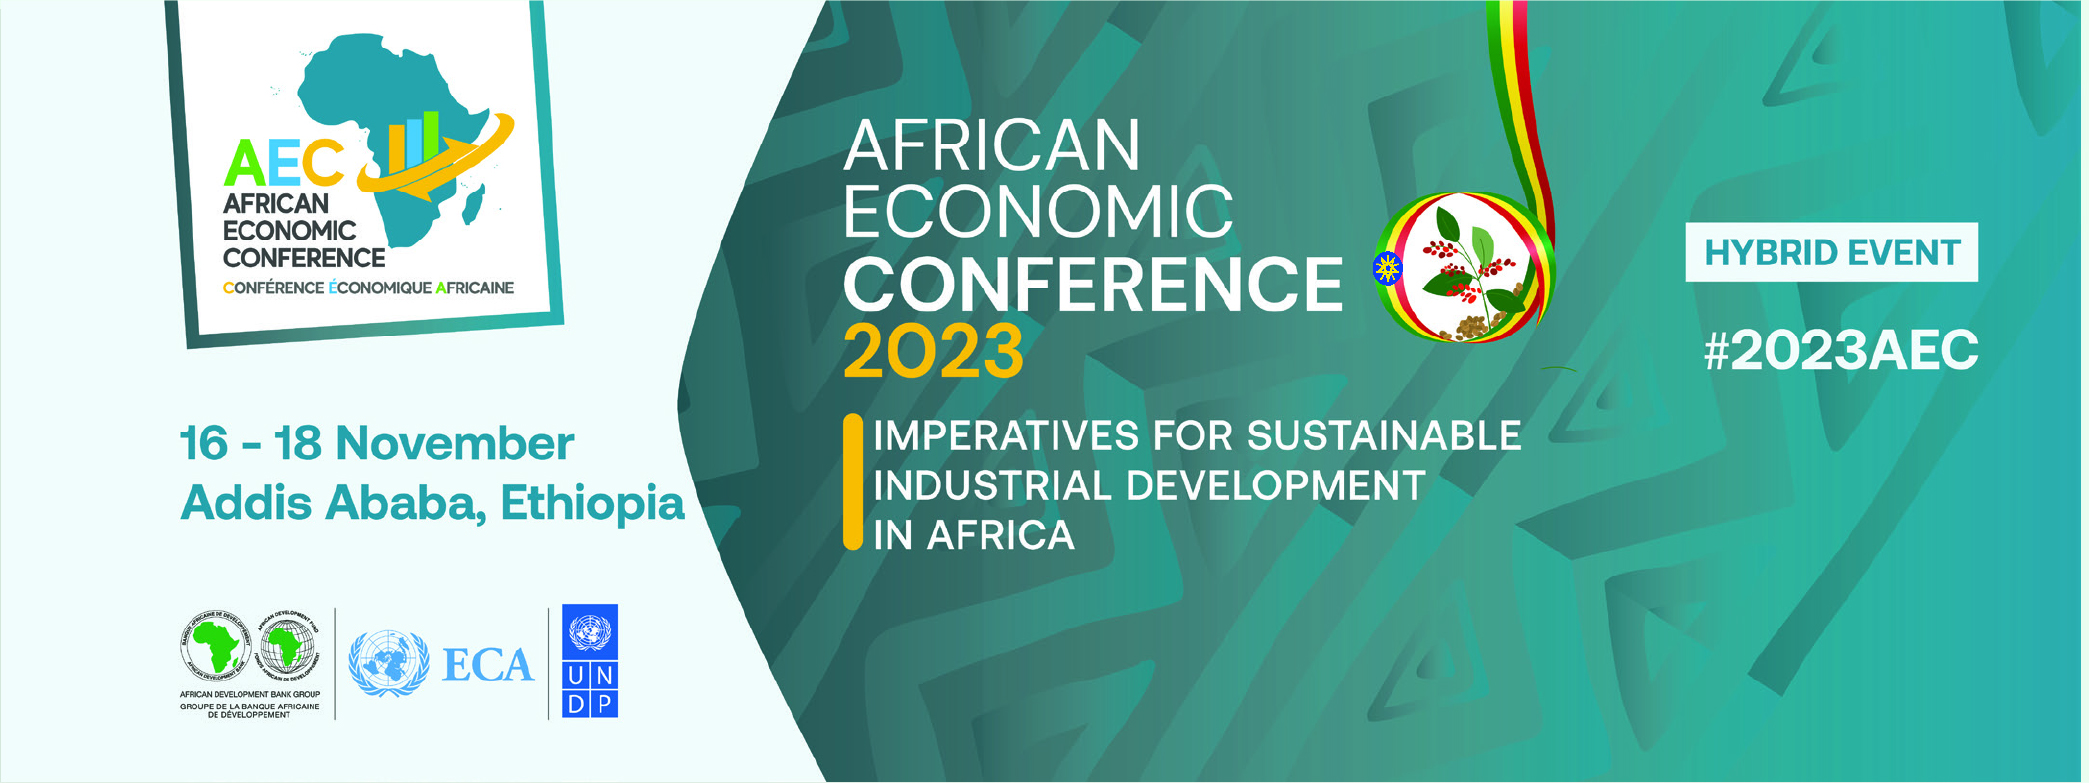 African Economic Conference 2023 